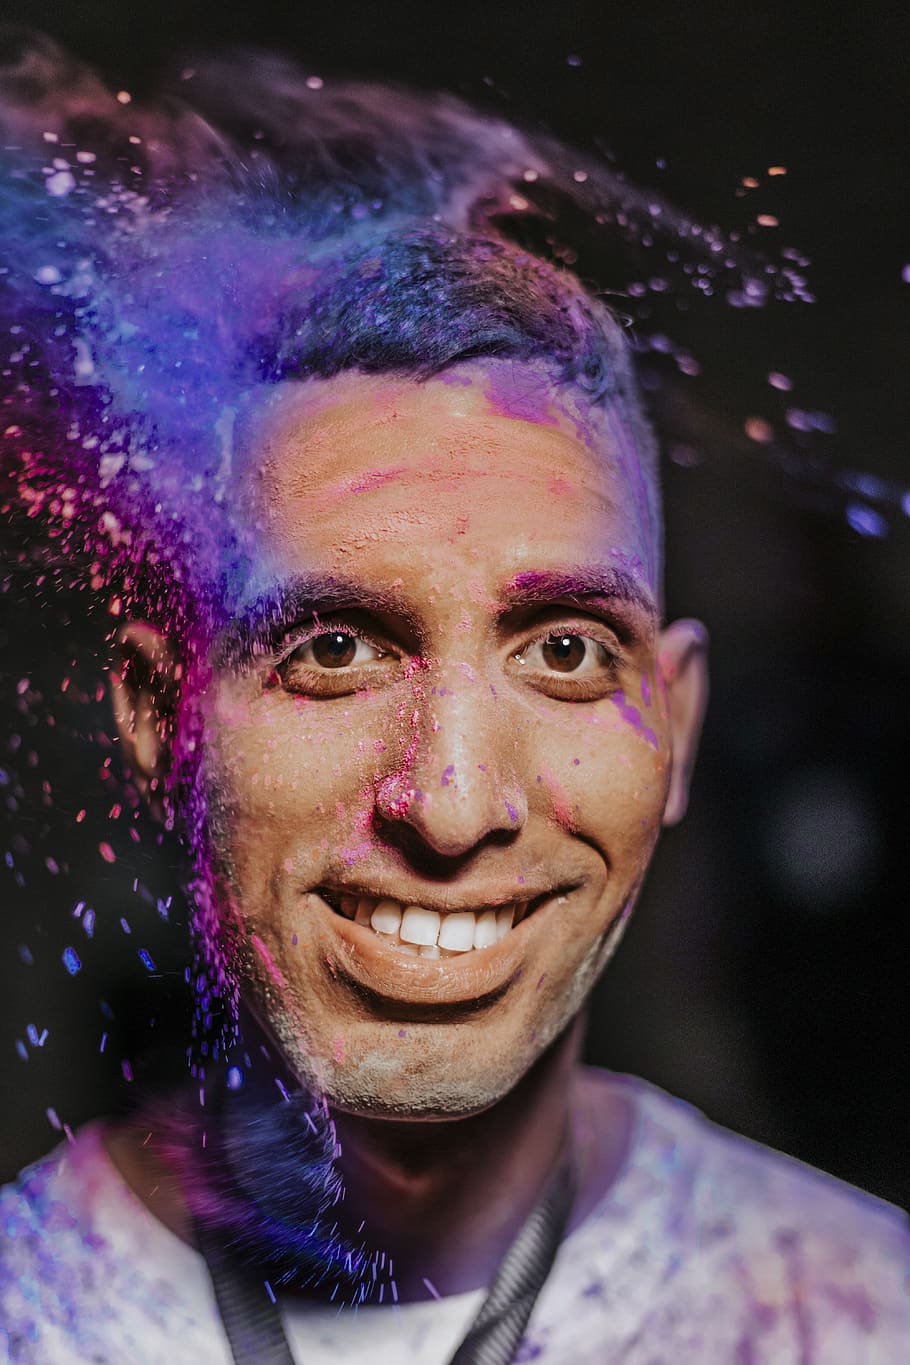 Photo Of Man With Powder On His Face, adult, blur, close-up, colors